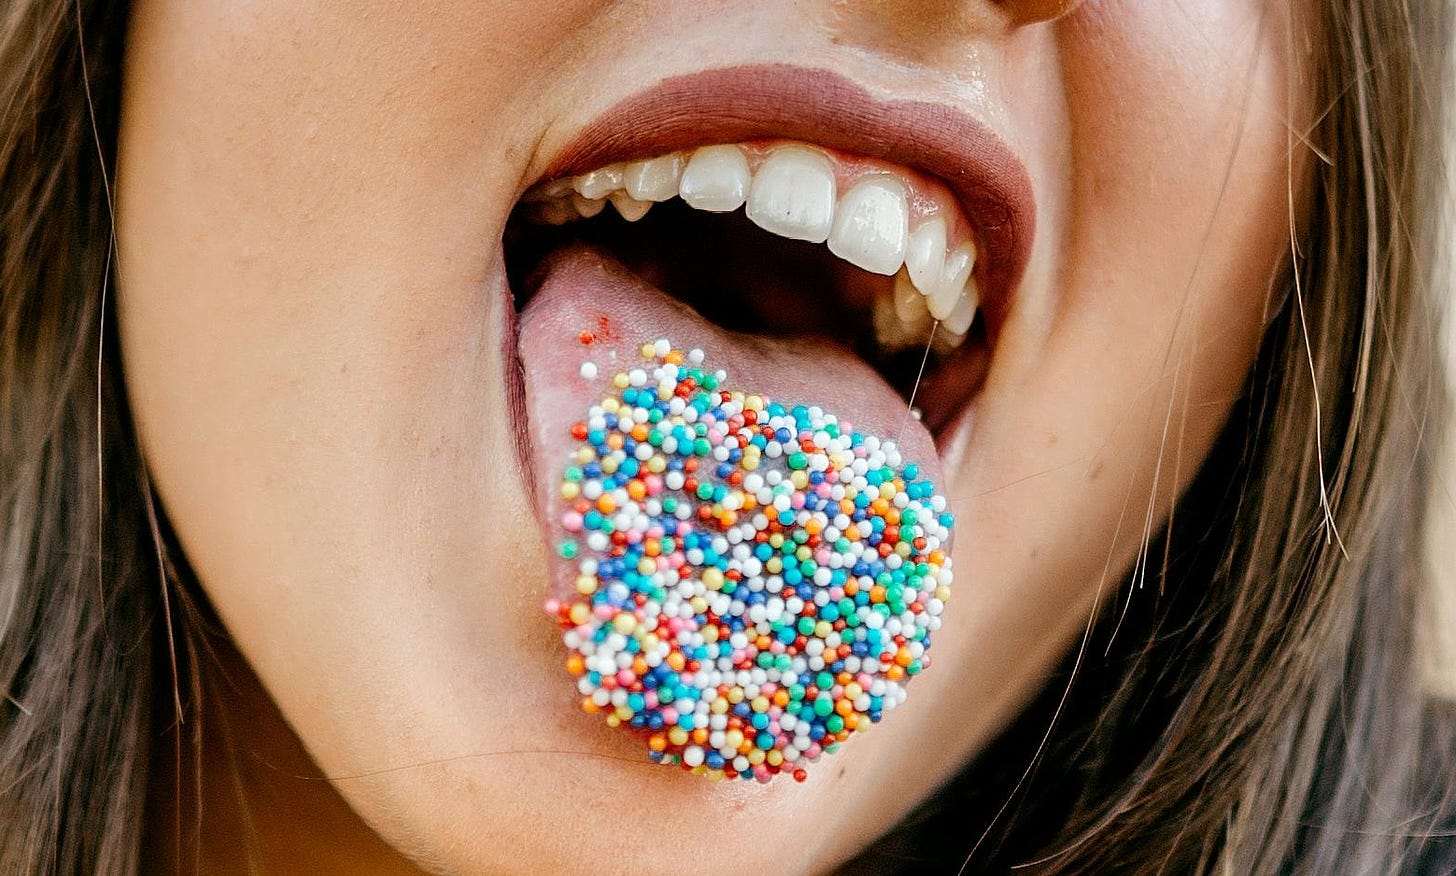 Tongue covered in sprinkles